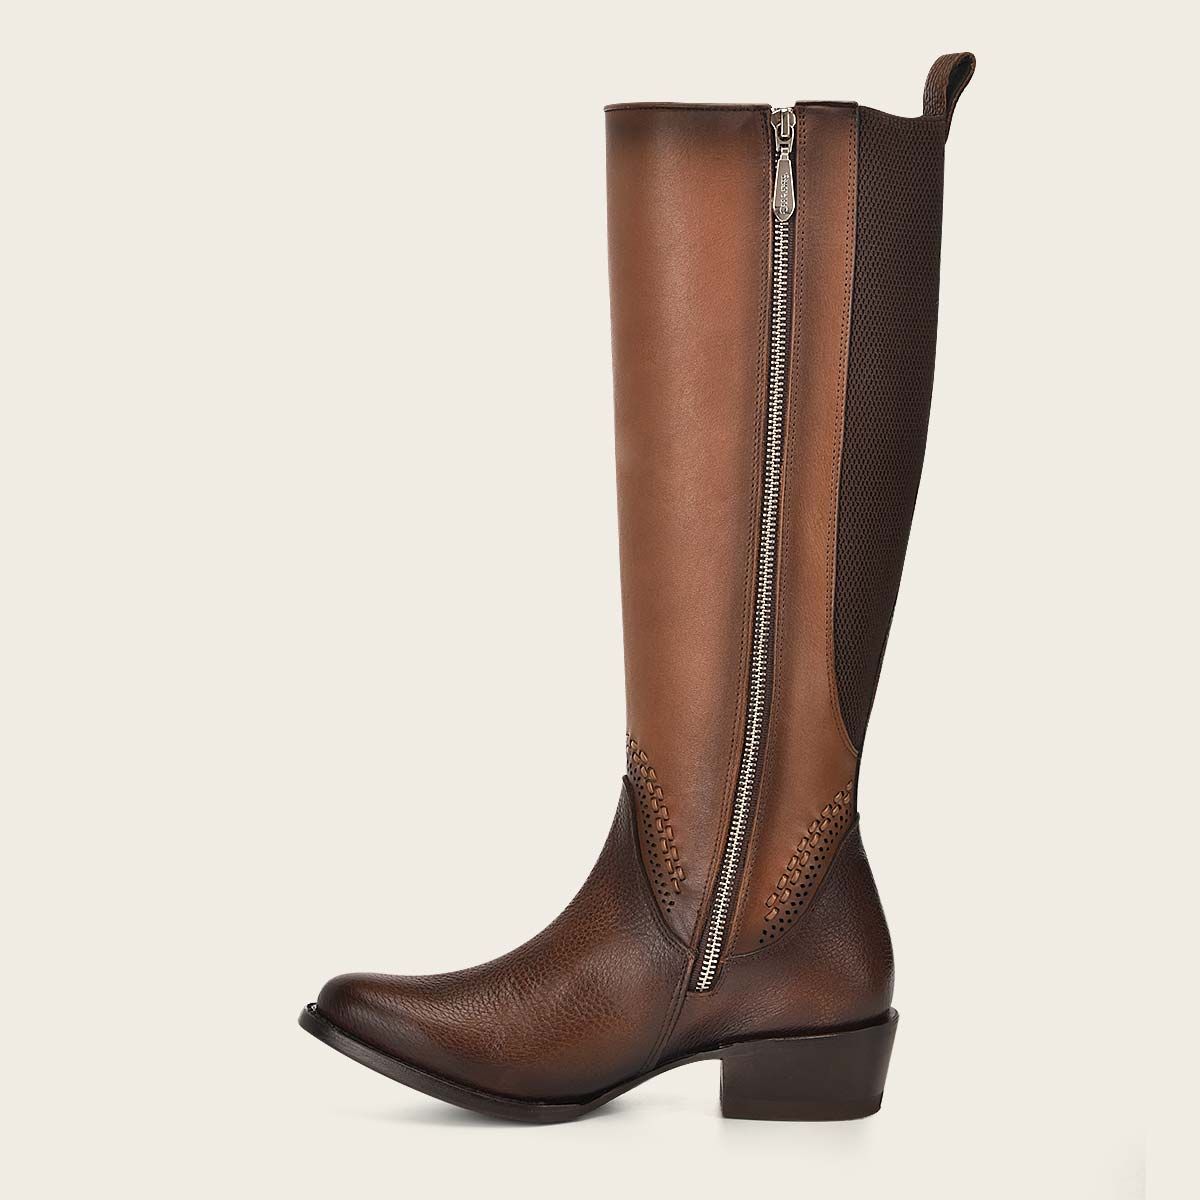 High brown boot with different textures - 1X4IRS - Cuadra Shop